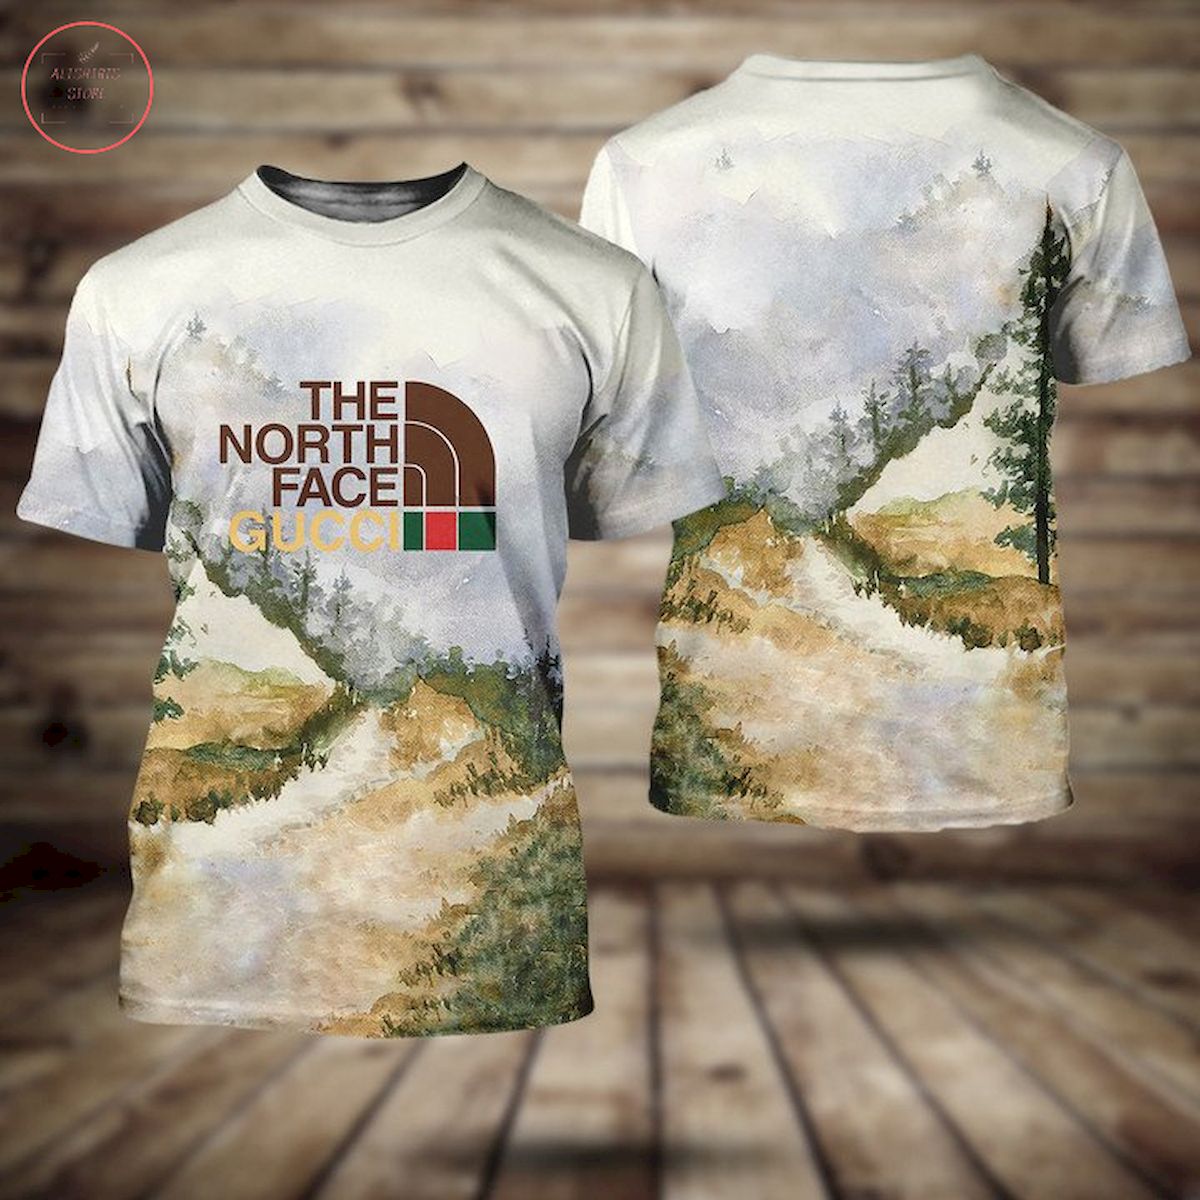 The North Face x Gucci Luxury Brand T-shirt 3d